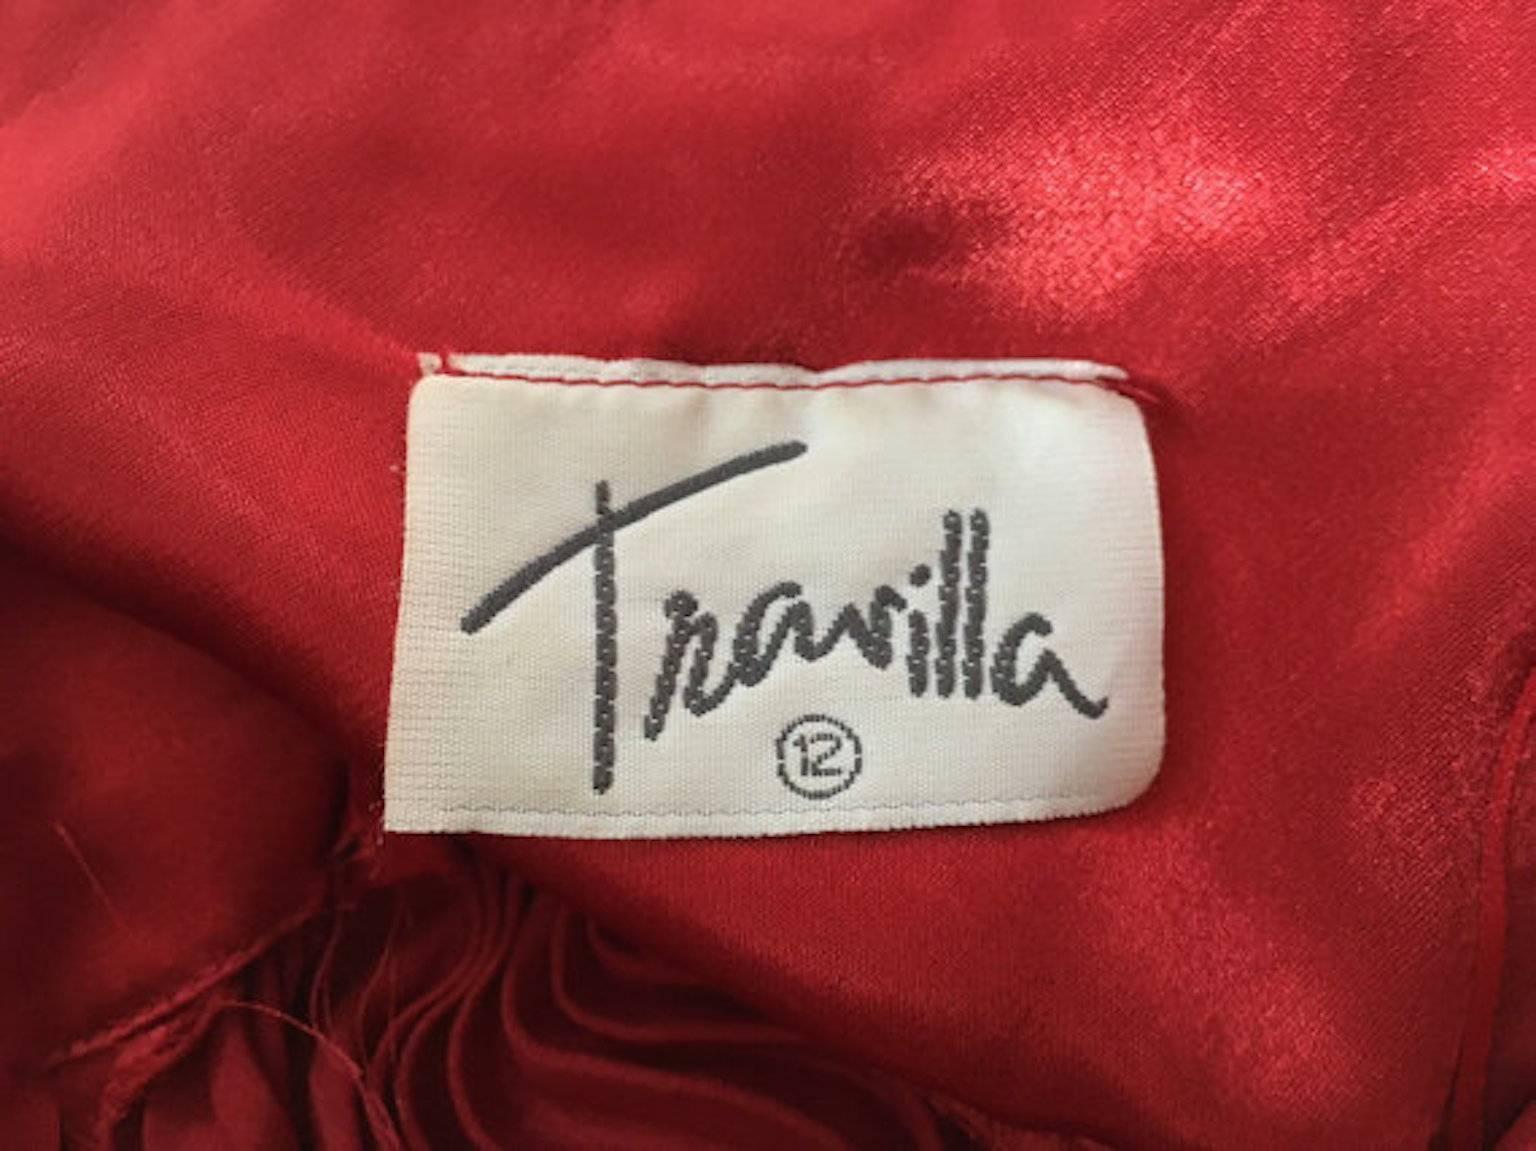 William Travilla Red Satin Pleated Cocktail Halter Dress. 

A design of the dress worn by Marilyn in The Seven Year Itch. 

Made in the late 1970s. 

Made from satin polyester

Fastens with a back zip.

Size UK 8/10 Measures 17.5 inches